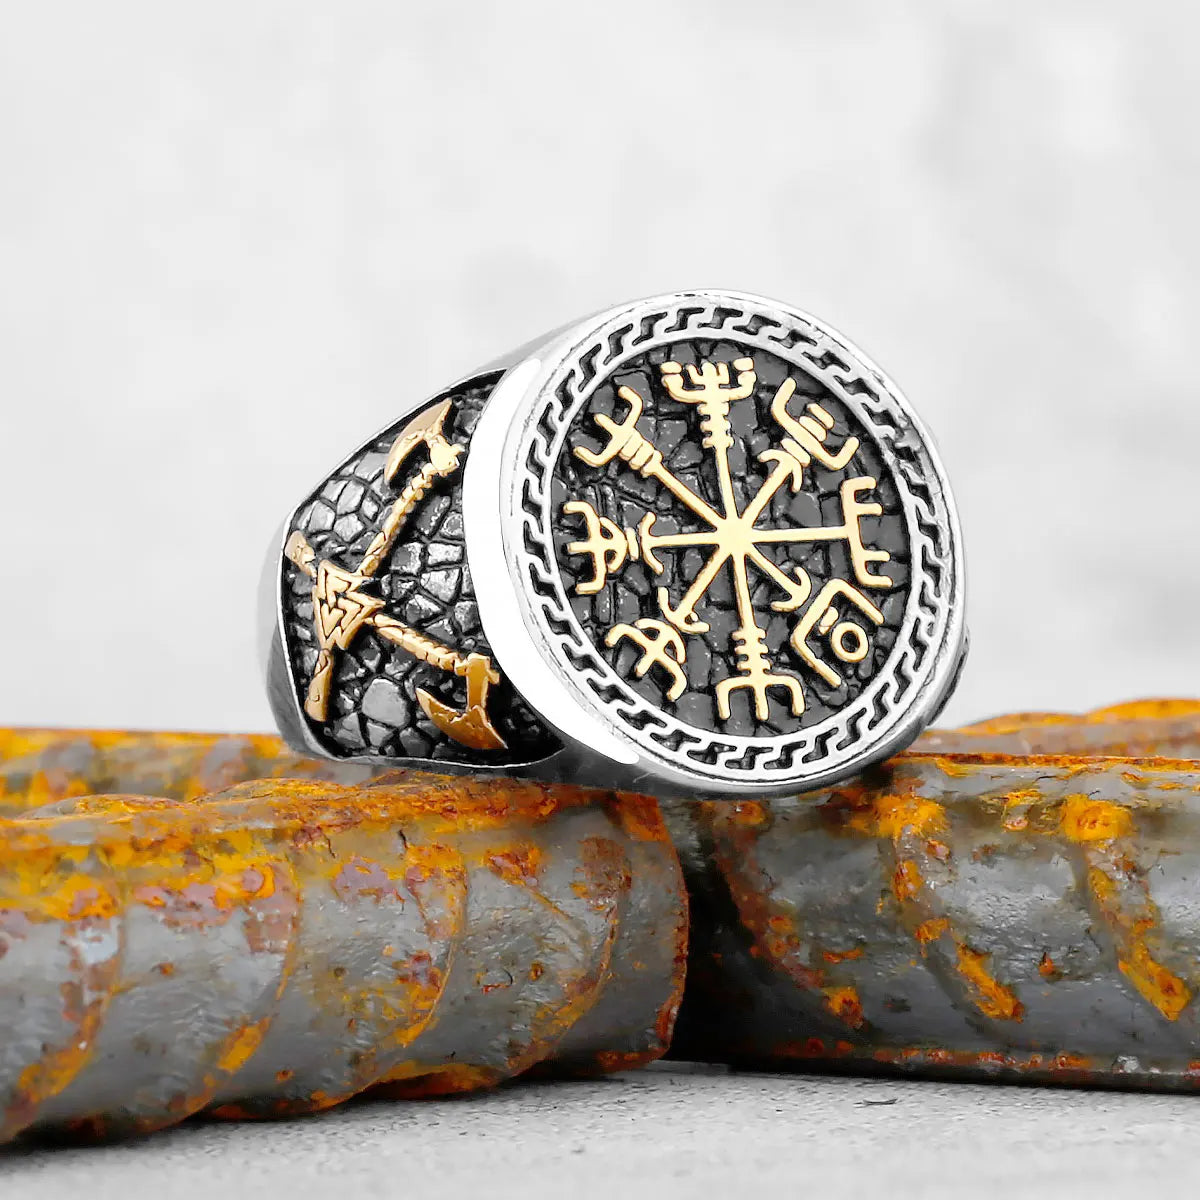 Vintage Stainless Steel Compass Men's Ring